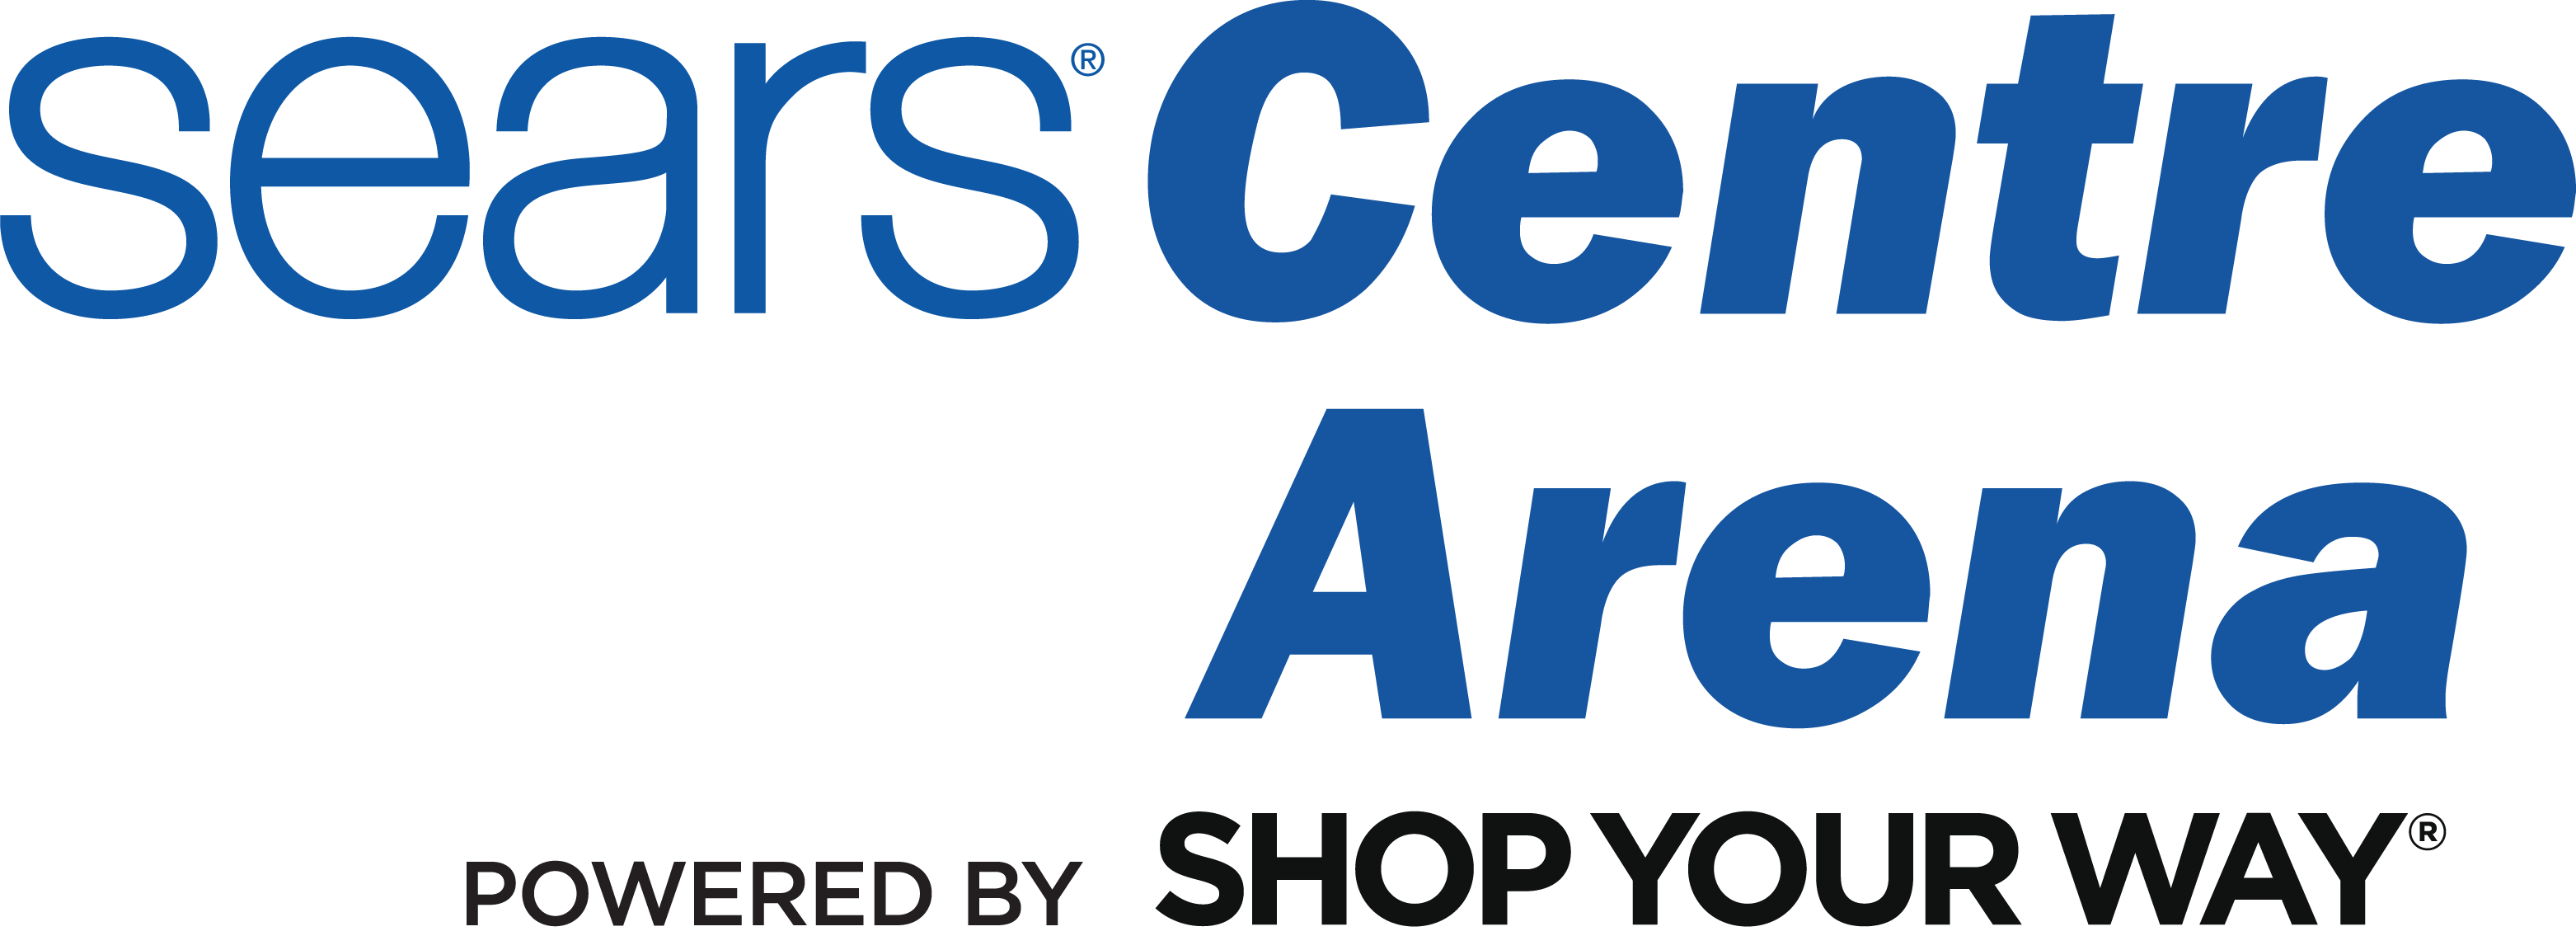 Sears.com Logo - Concert, Events & more in Northwestern Chicago